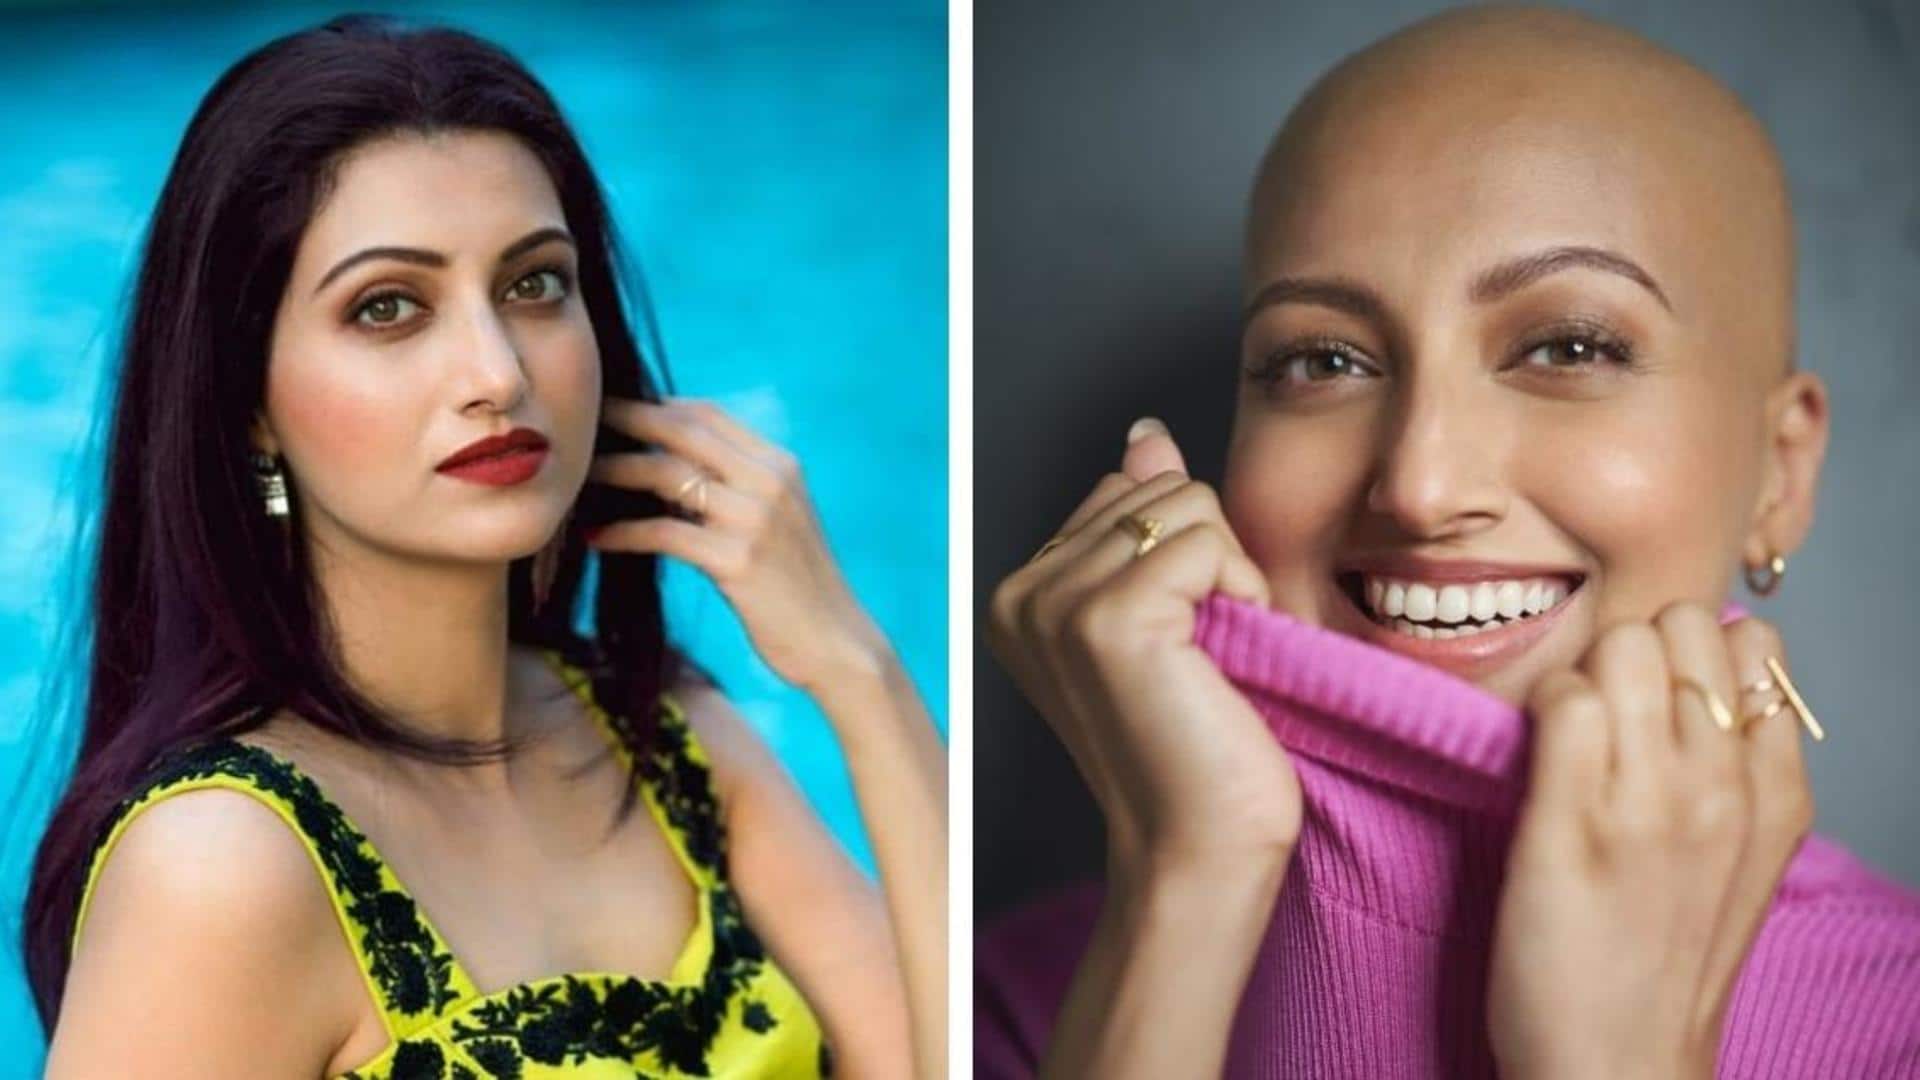 Women's Day: Hamsa Nandini opens up about her cancer battle 